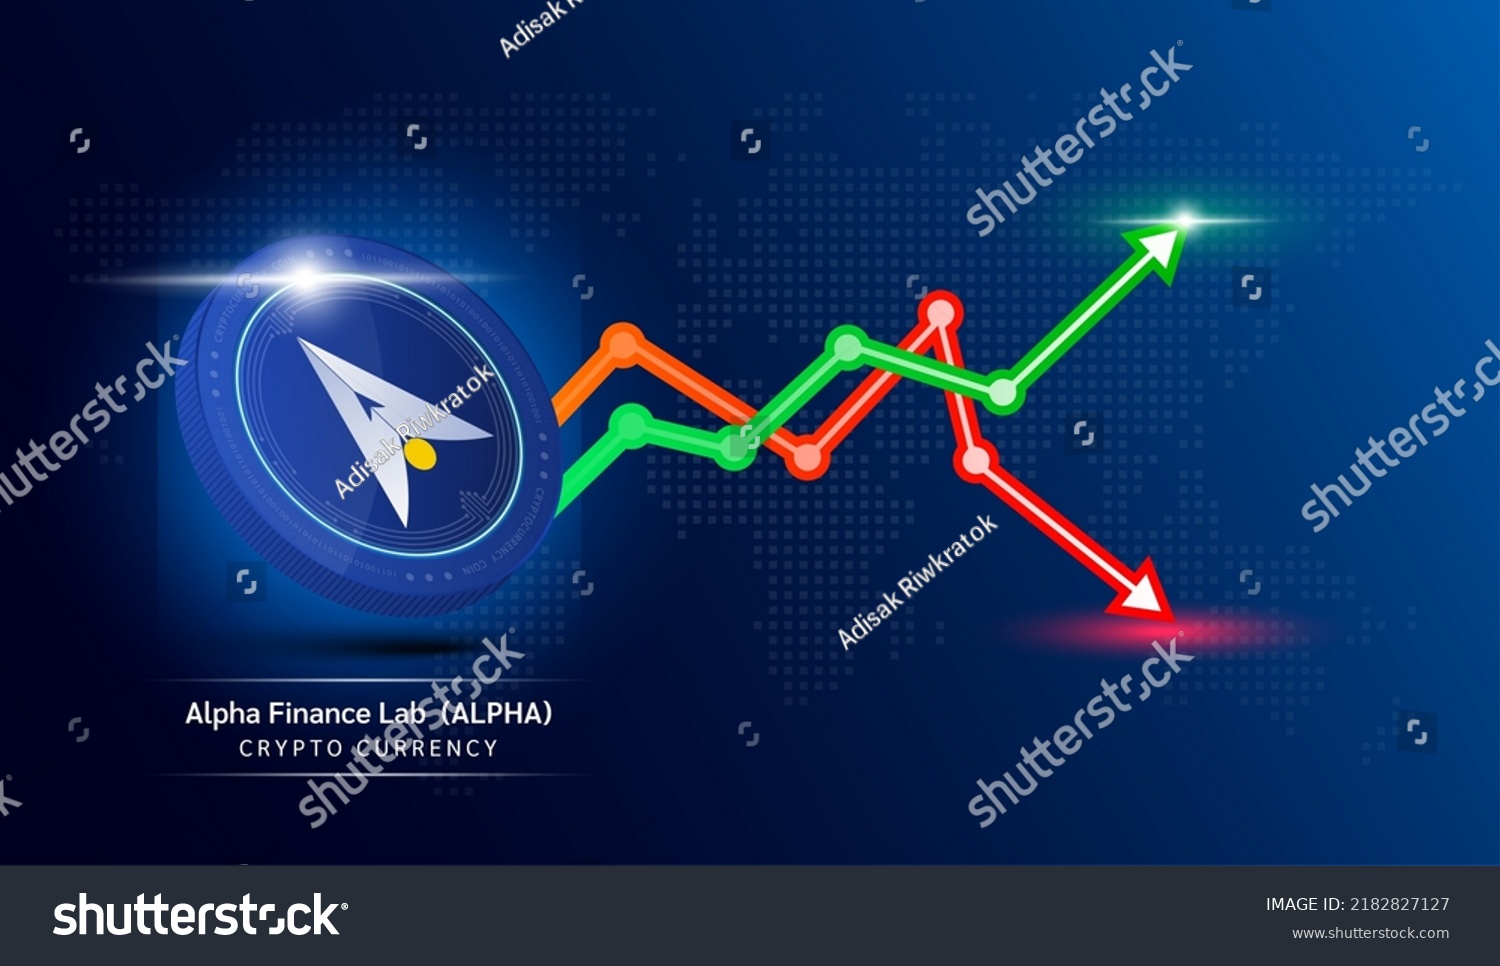 SVG of Alpha Finance Lab coin blue. Cryptocurrency token symbol with stock market investment trading graph green and red. Economic trends business concept. 3D Vector illustration. svg